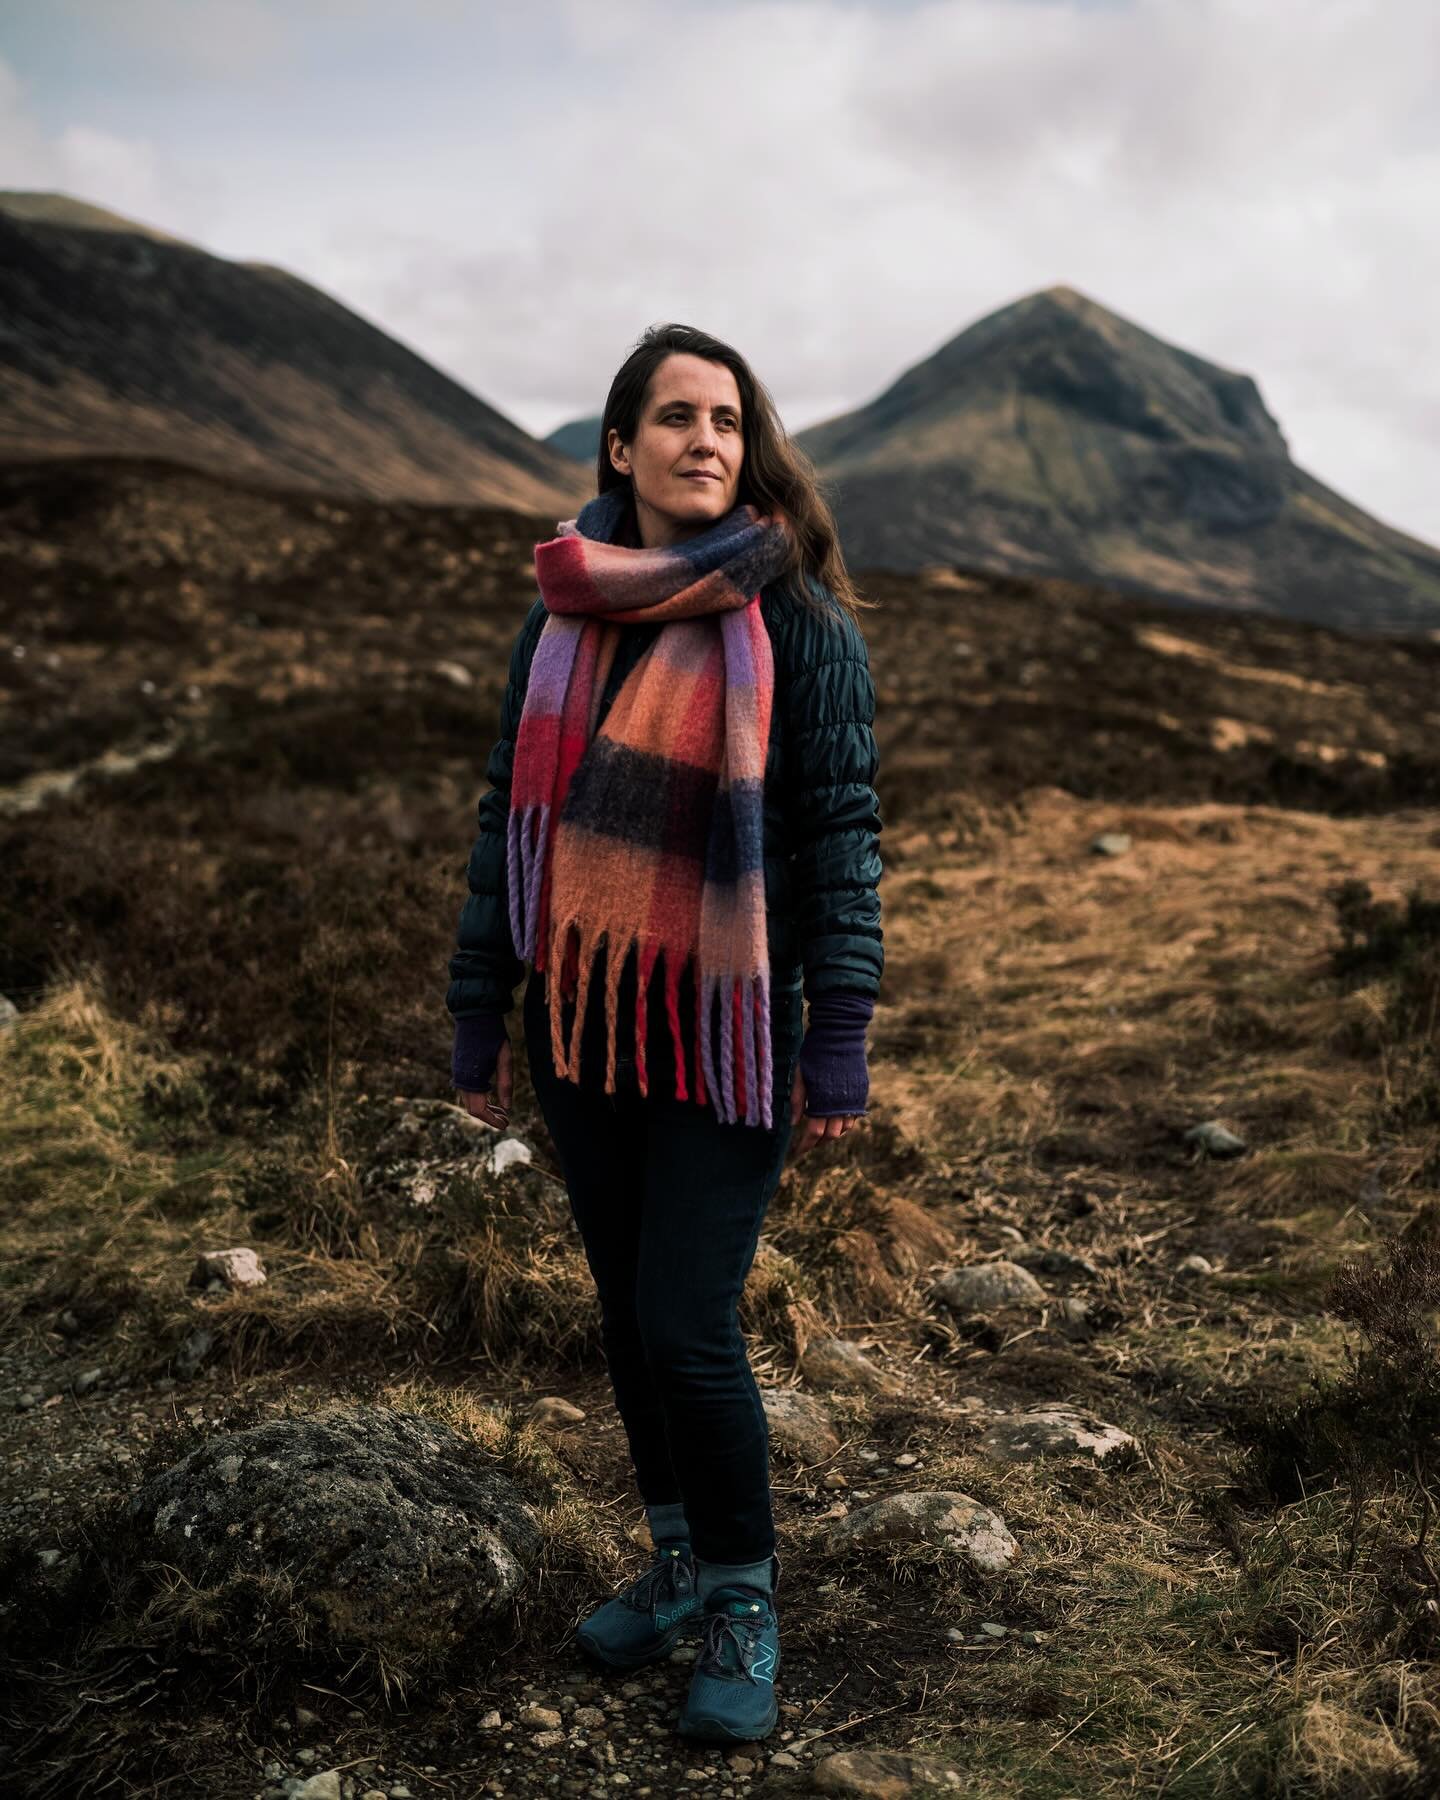 The day after our wild and windy elopement was calm and quiet. We hiked the quiet trails of Sligachan, on trails that wound their way through the Heather. It felt as if the weather was a metaphor - After months of planning and excitement, we'd done i